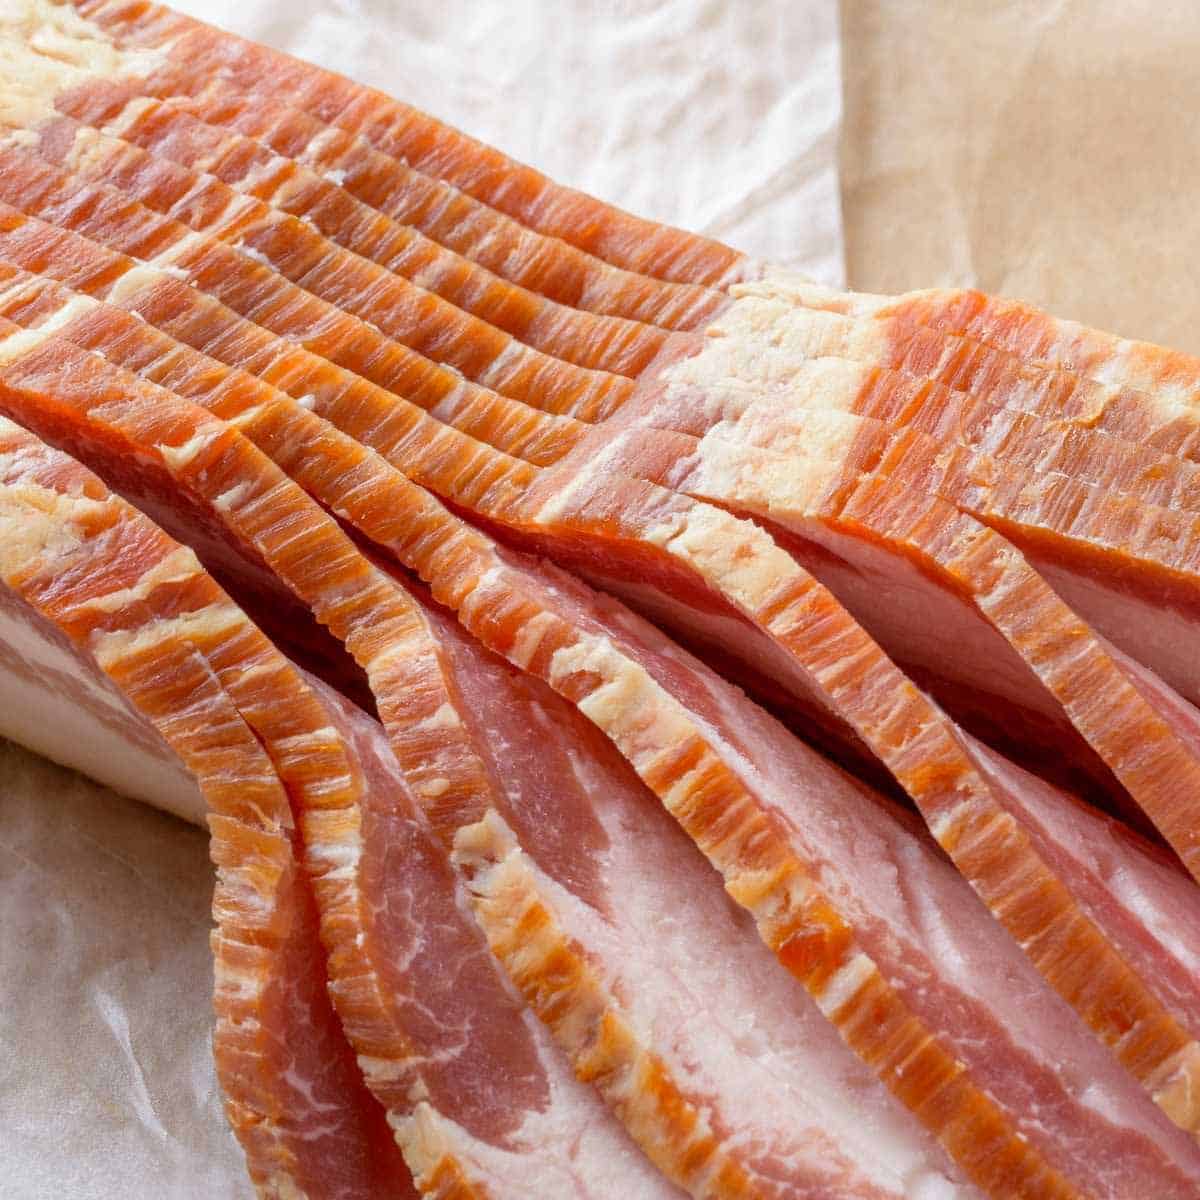 A pound of thick sliced bacon on a piece of butcher paper.